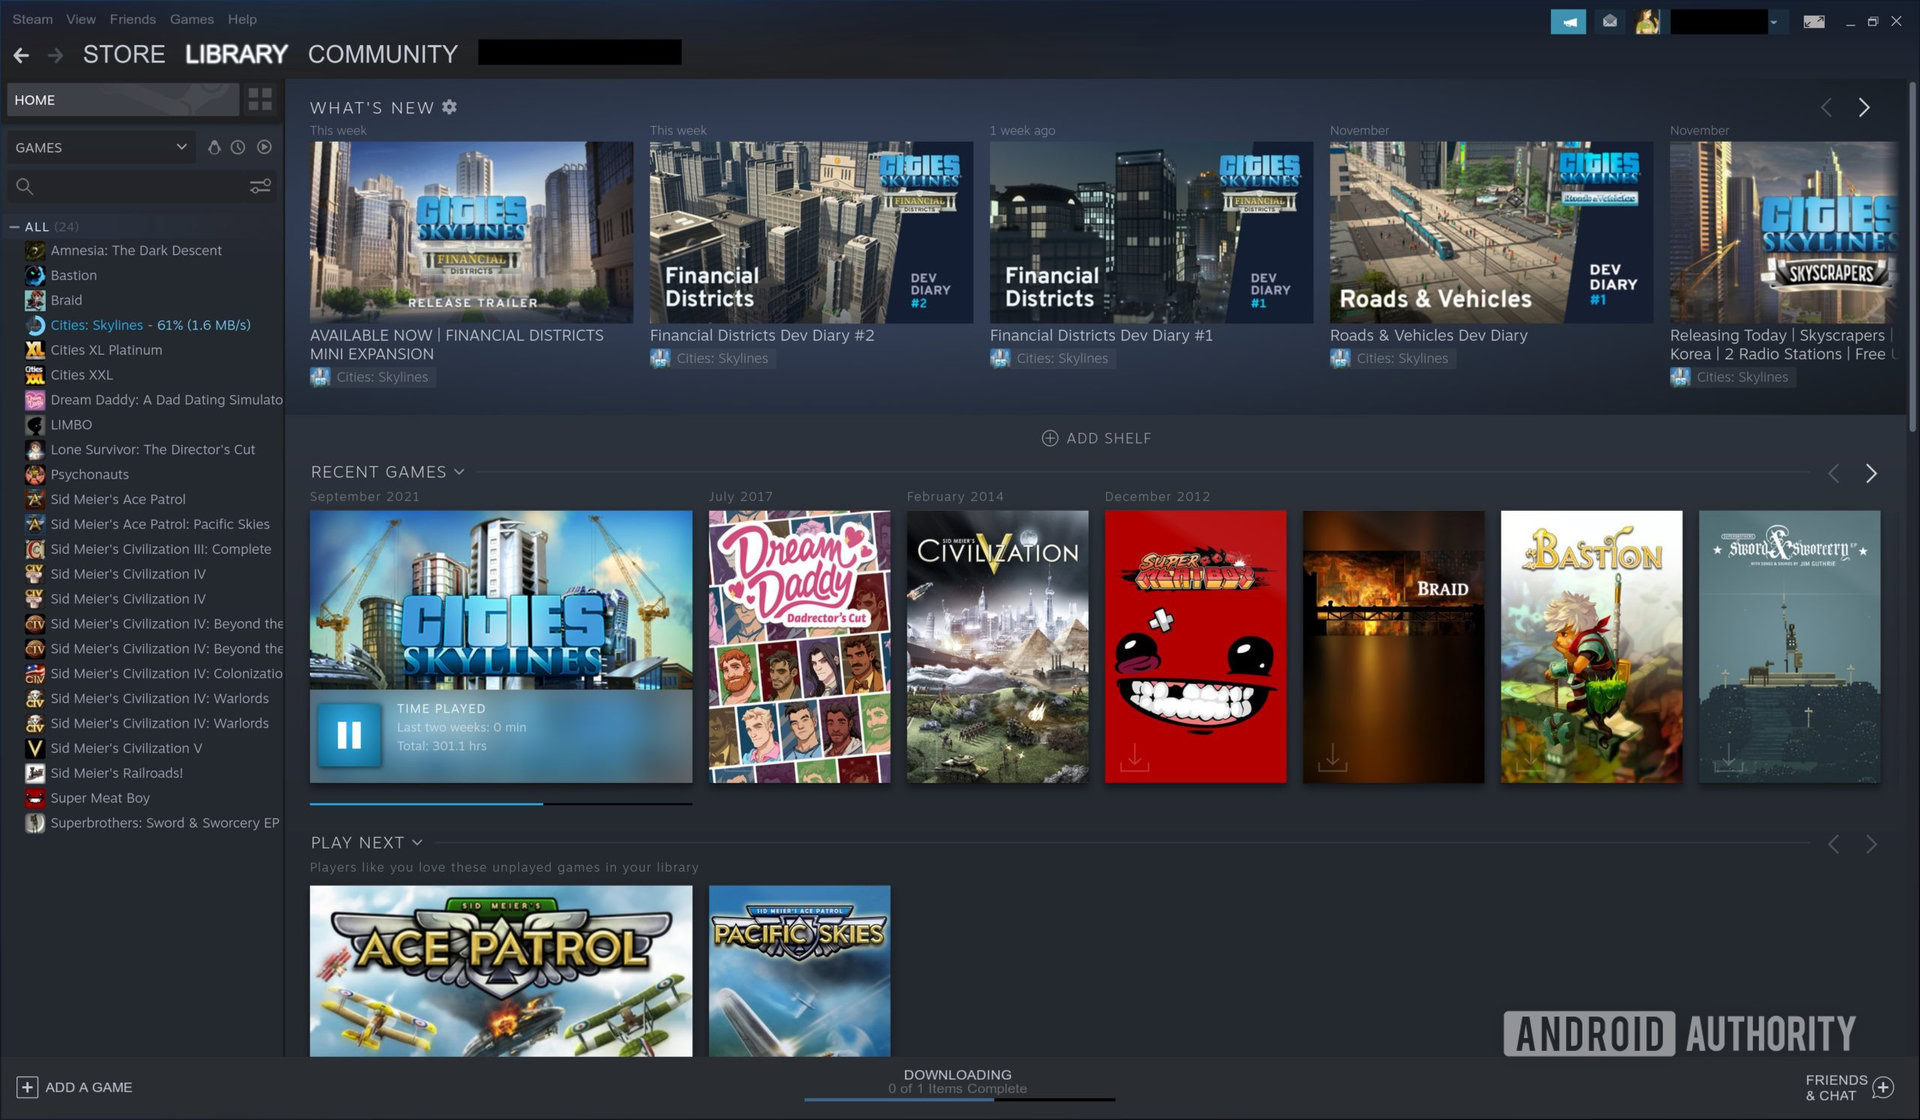 How to download steam workshop items without steam (in most games